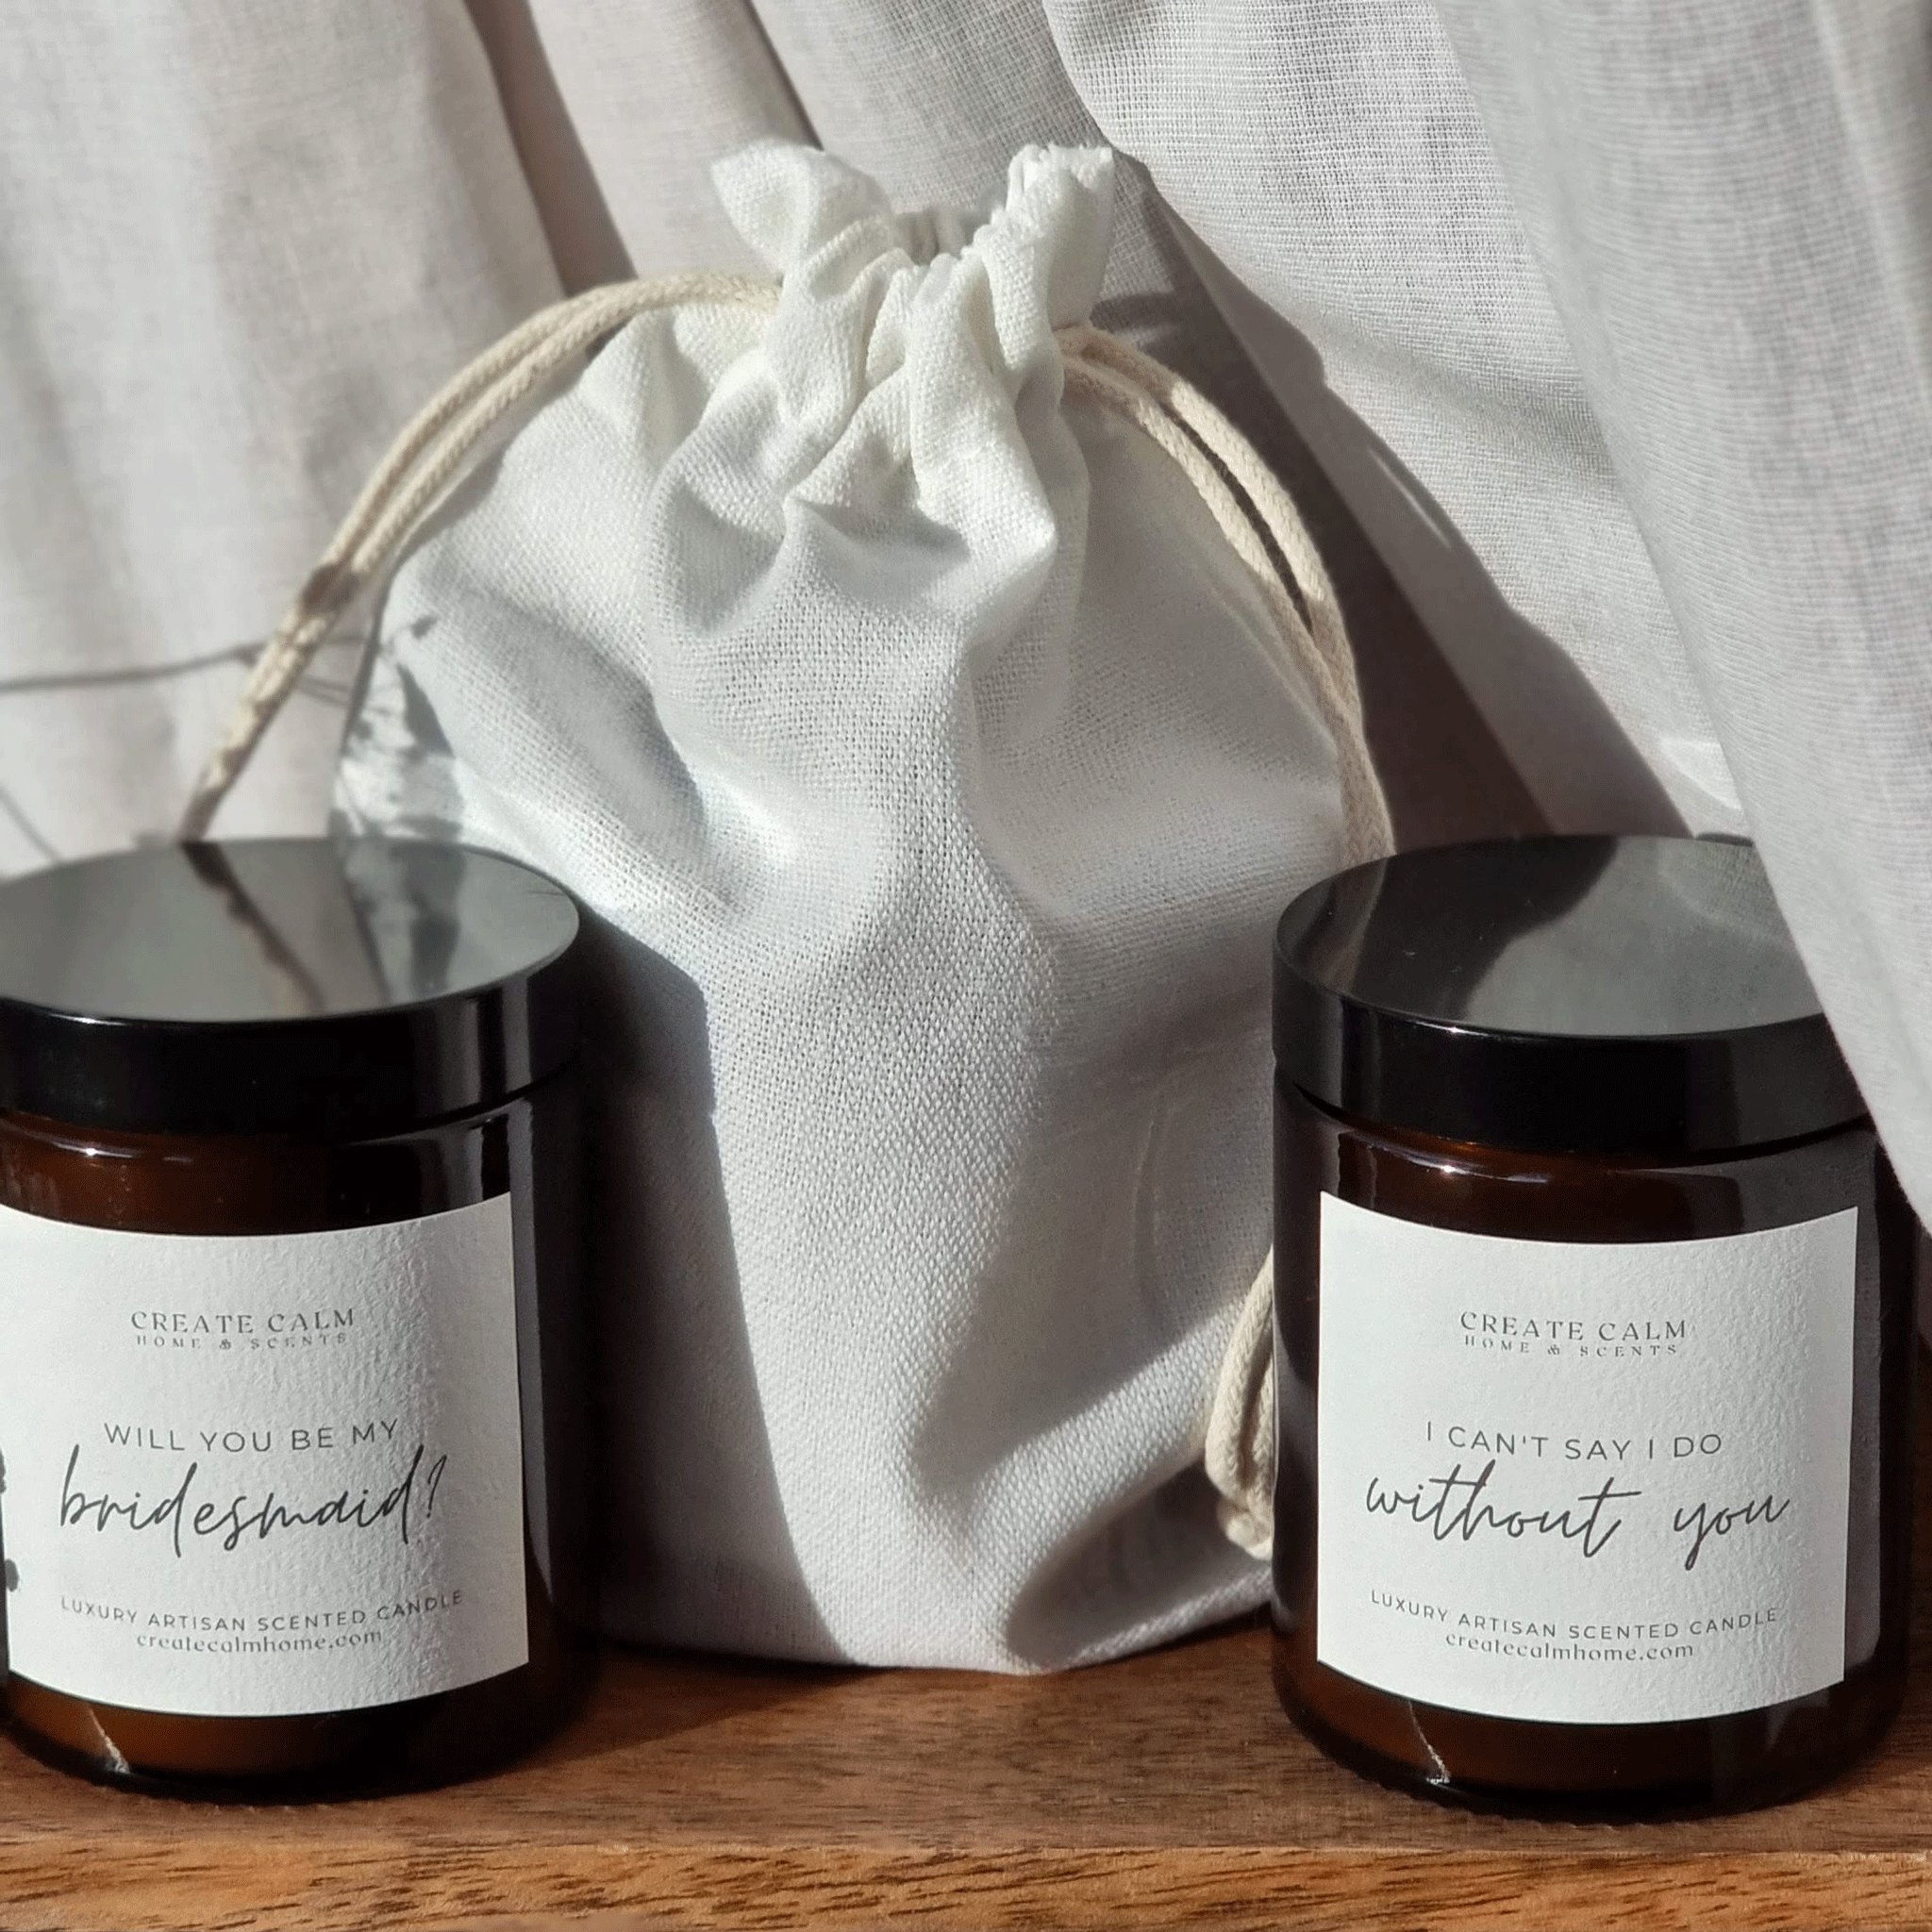 Wedding party invite candles great for asking your nearest and dearest to be a part of your big day, says 'will you be my bridesmaid?' 'I cant say I do without you'